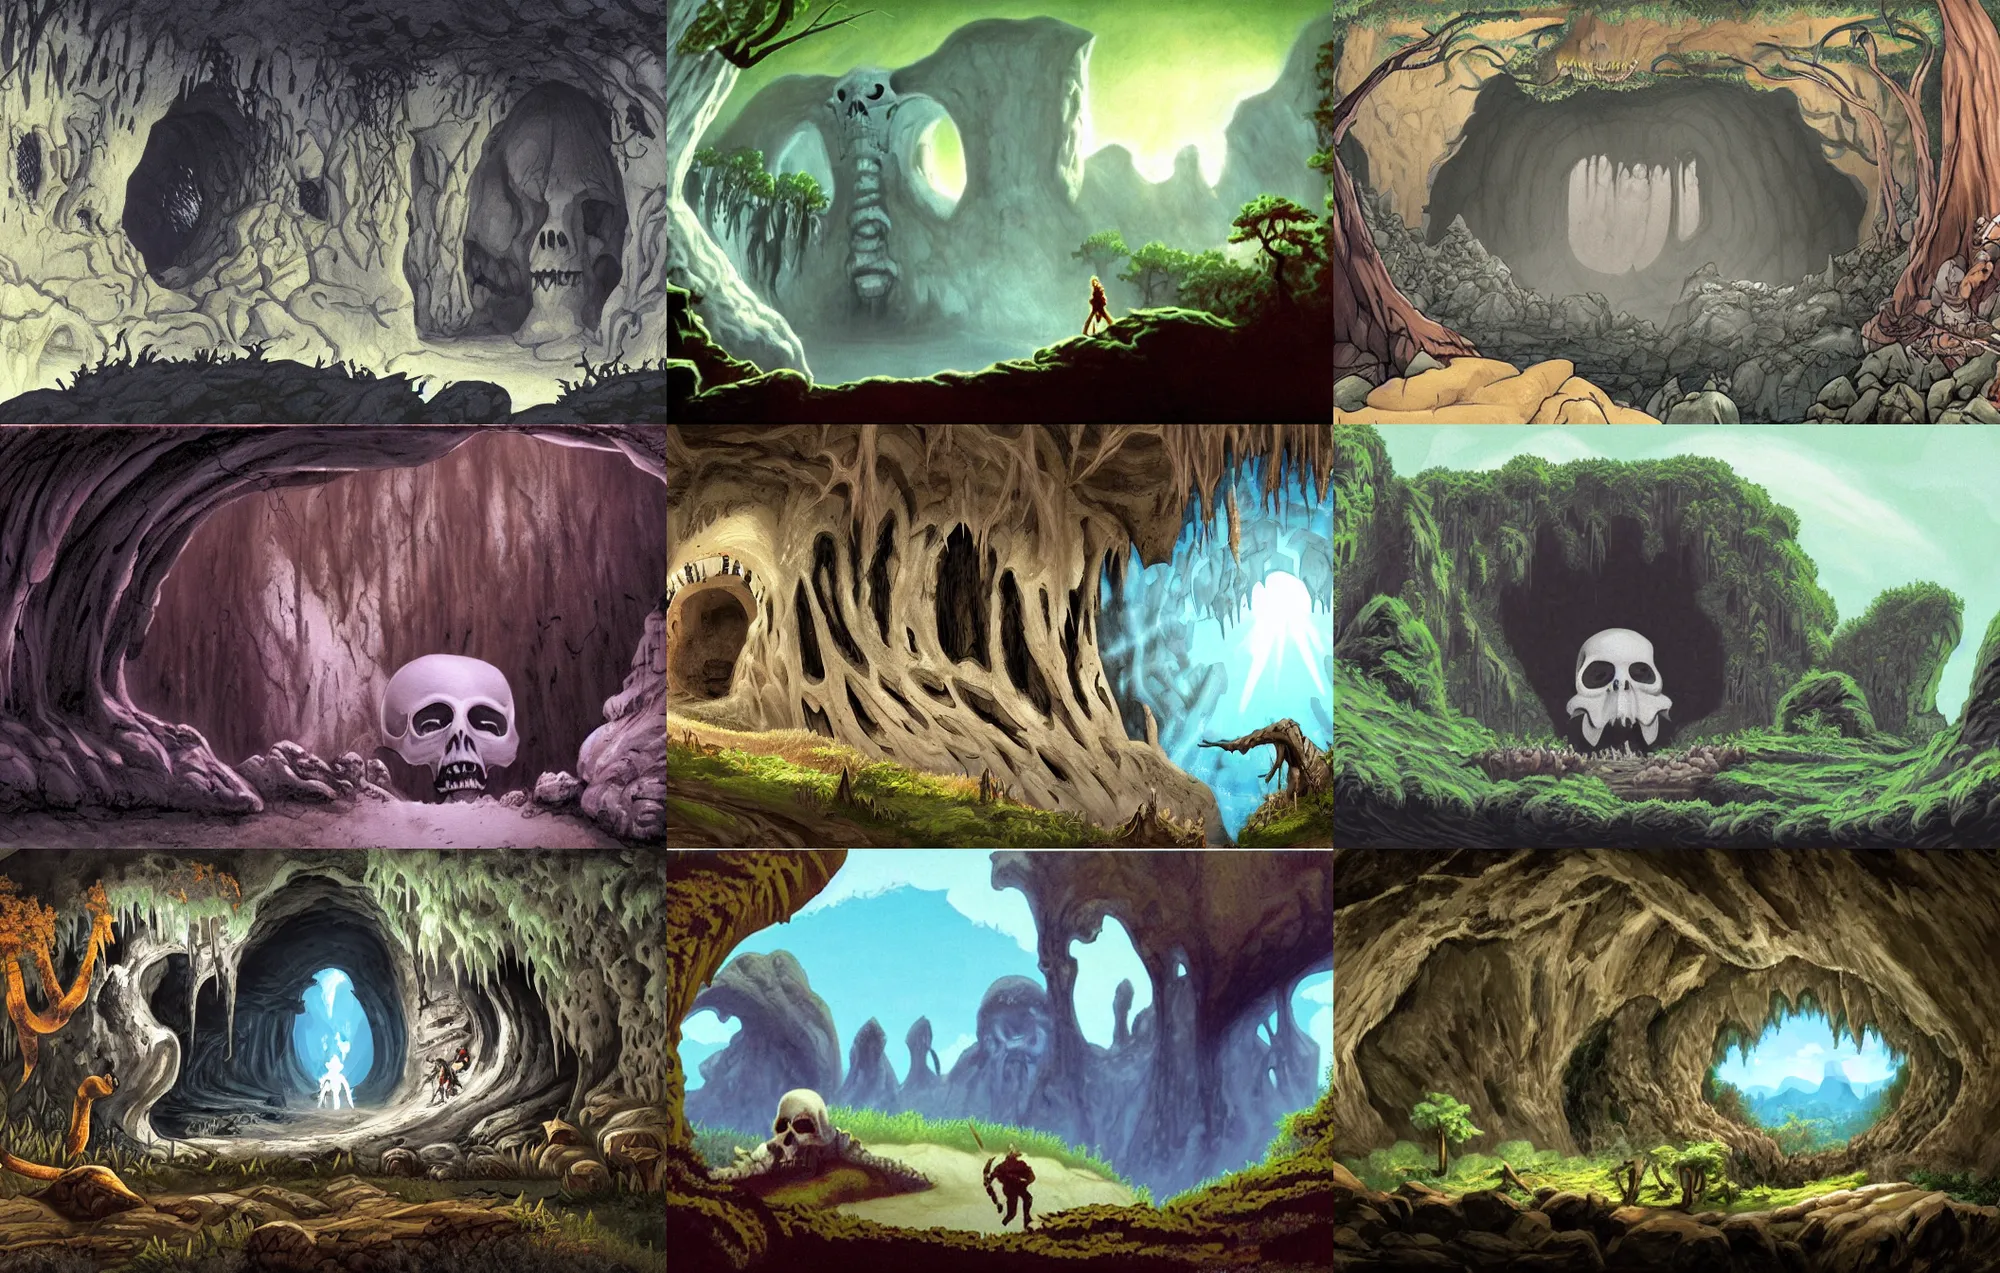 Prompt: a large cave entrance in the mouth of a giant white skull built into the side of a cliff next to a dark forest, from a fantasy point and click 2 d graphic adventure game, art inspired by john shroades, king's quest, sierra entertainment games, landscape painting